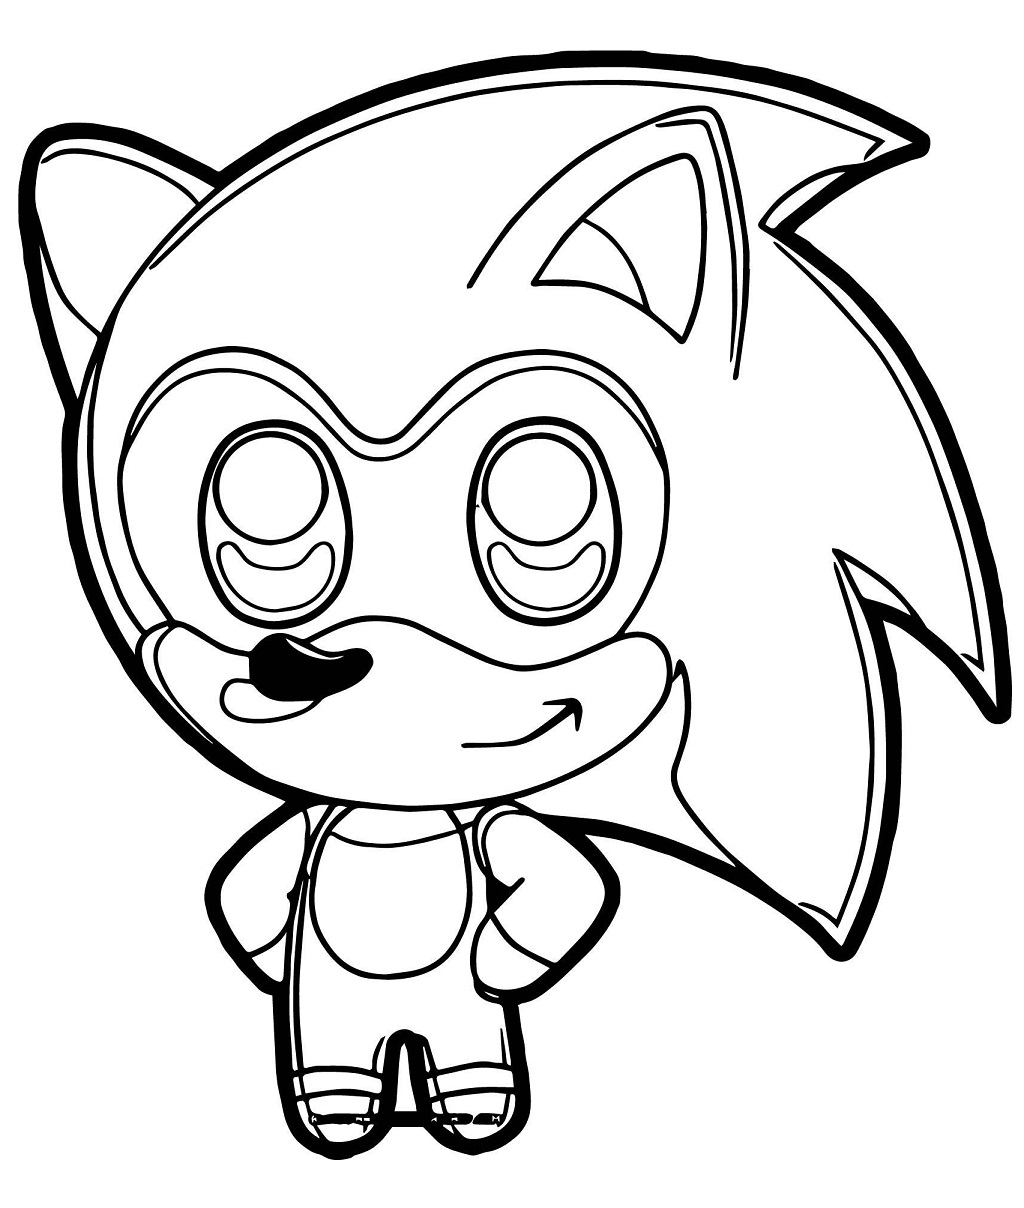 Chibi Sonic Coloring Page Free Printable Coloring Pages for Kids